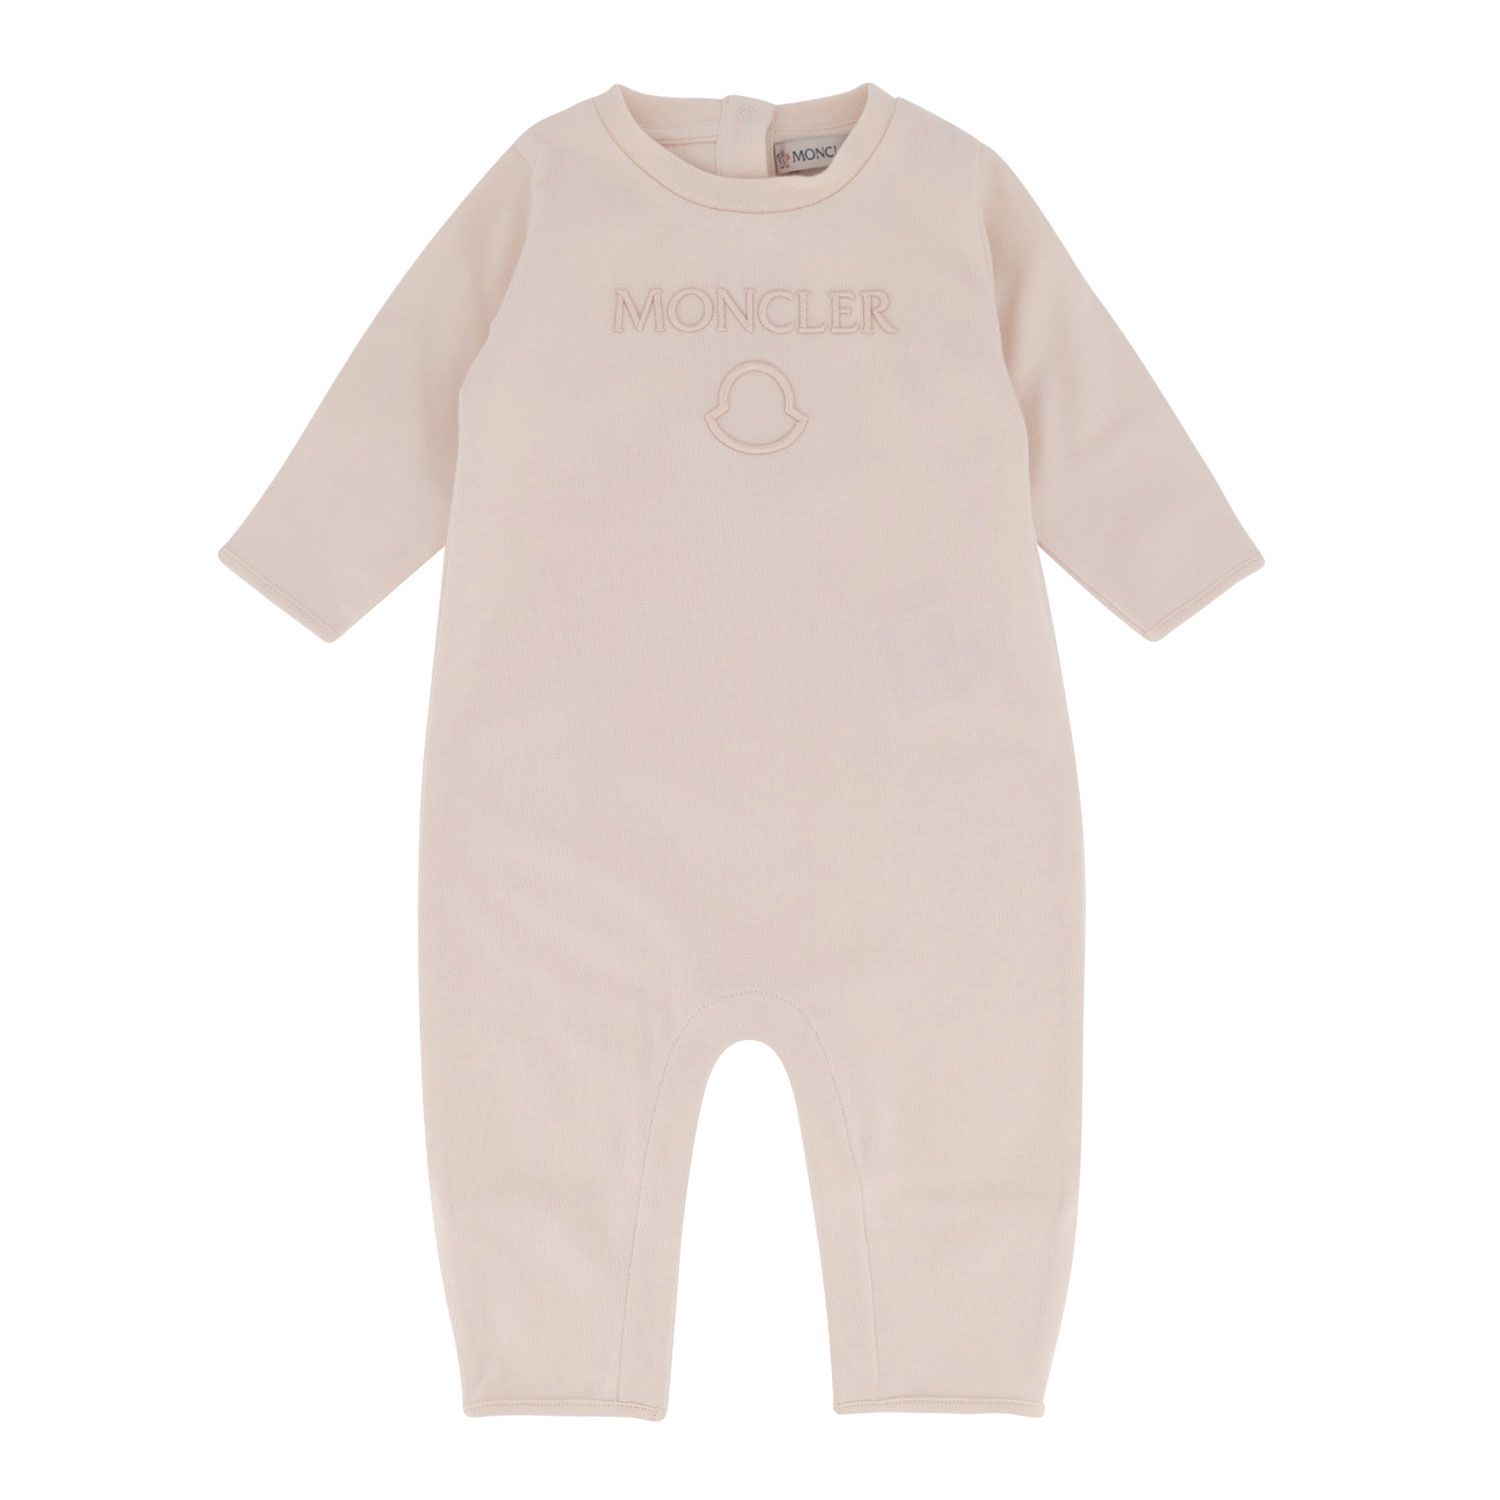 Picture of Moncler 8L00005 baby playsuit light pink